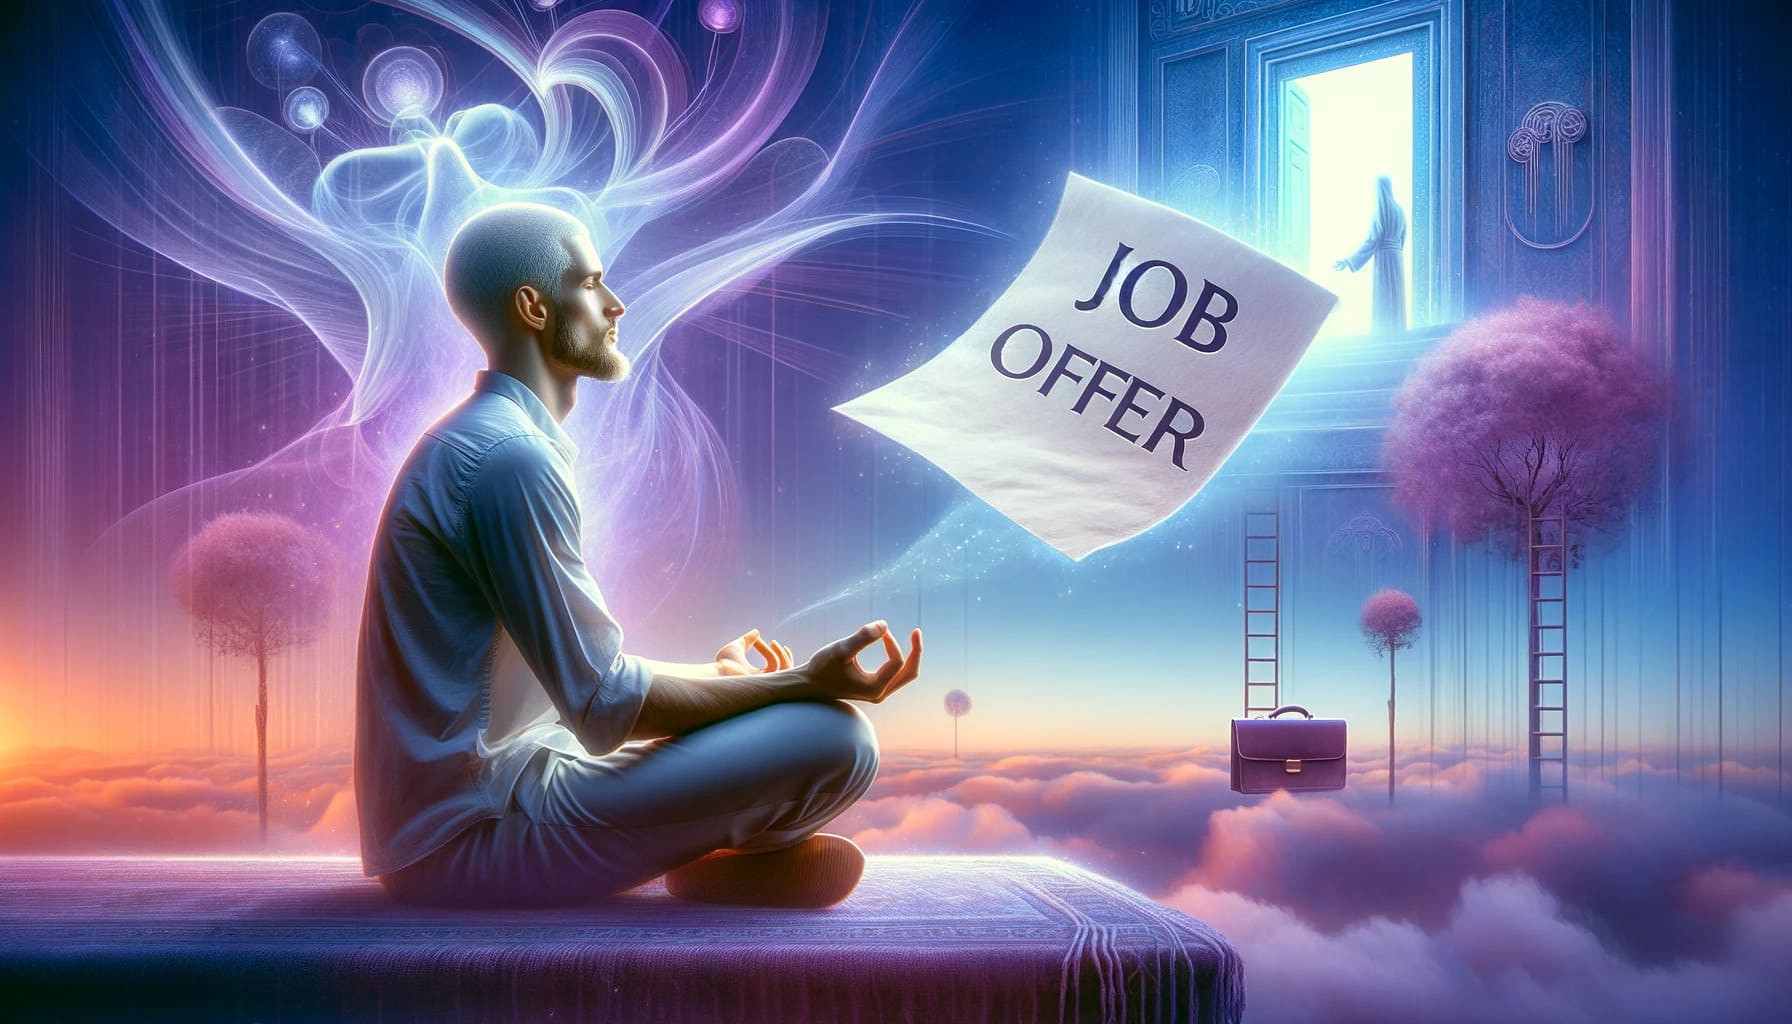 spiritual meaning of job offer in dream